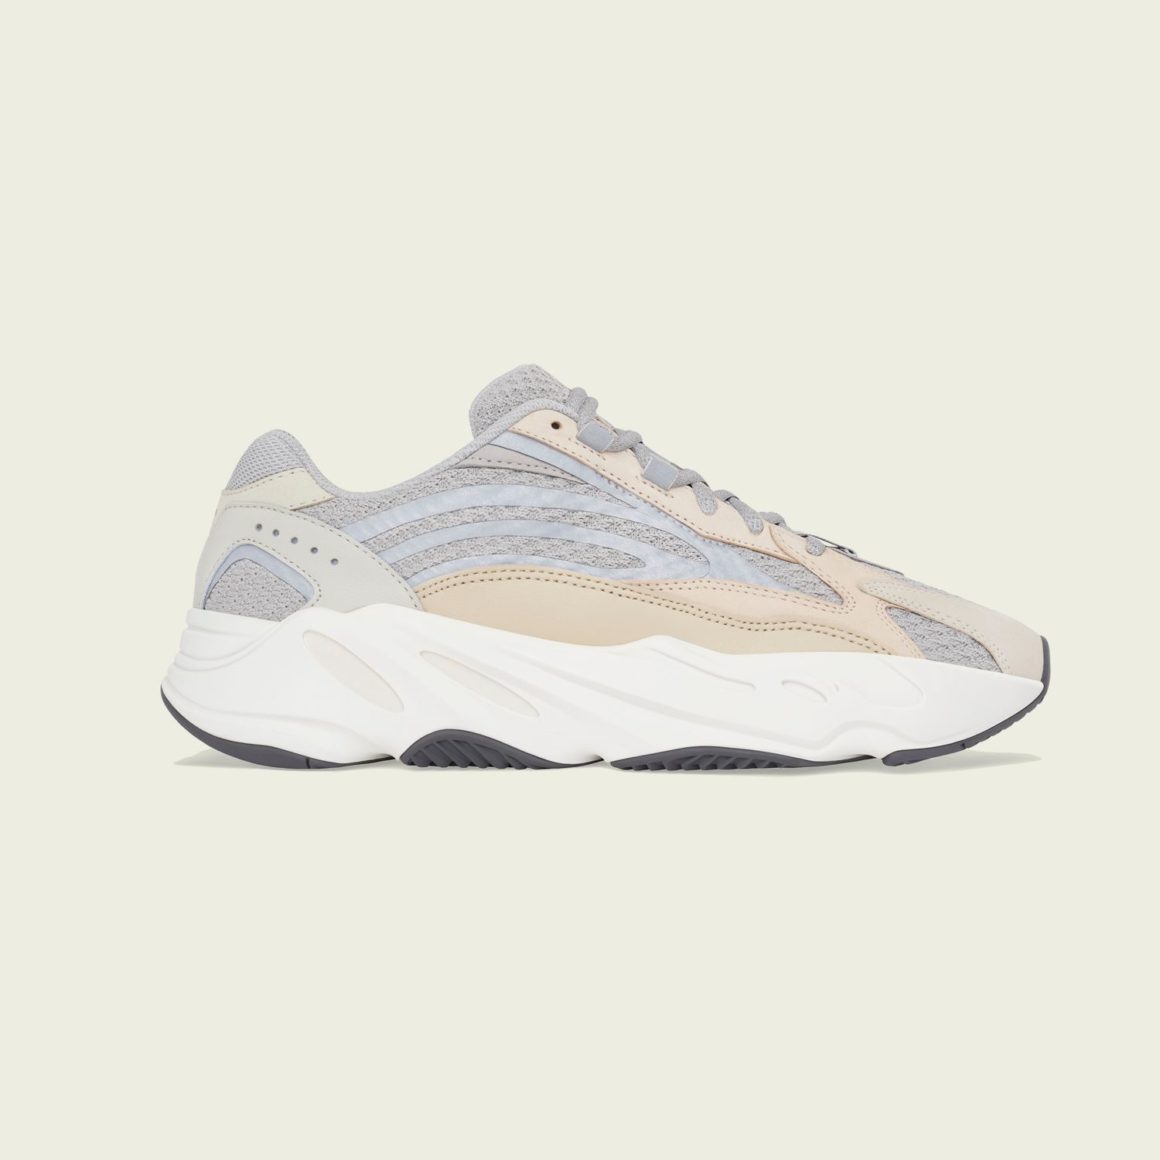 adidas yeezy 700 boost v2 GY7924 release 2021 1160x1160